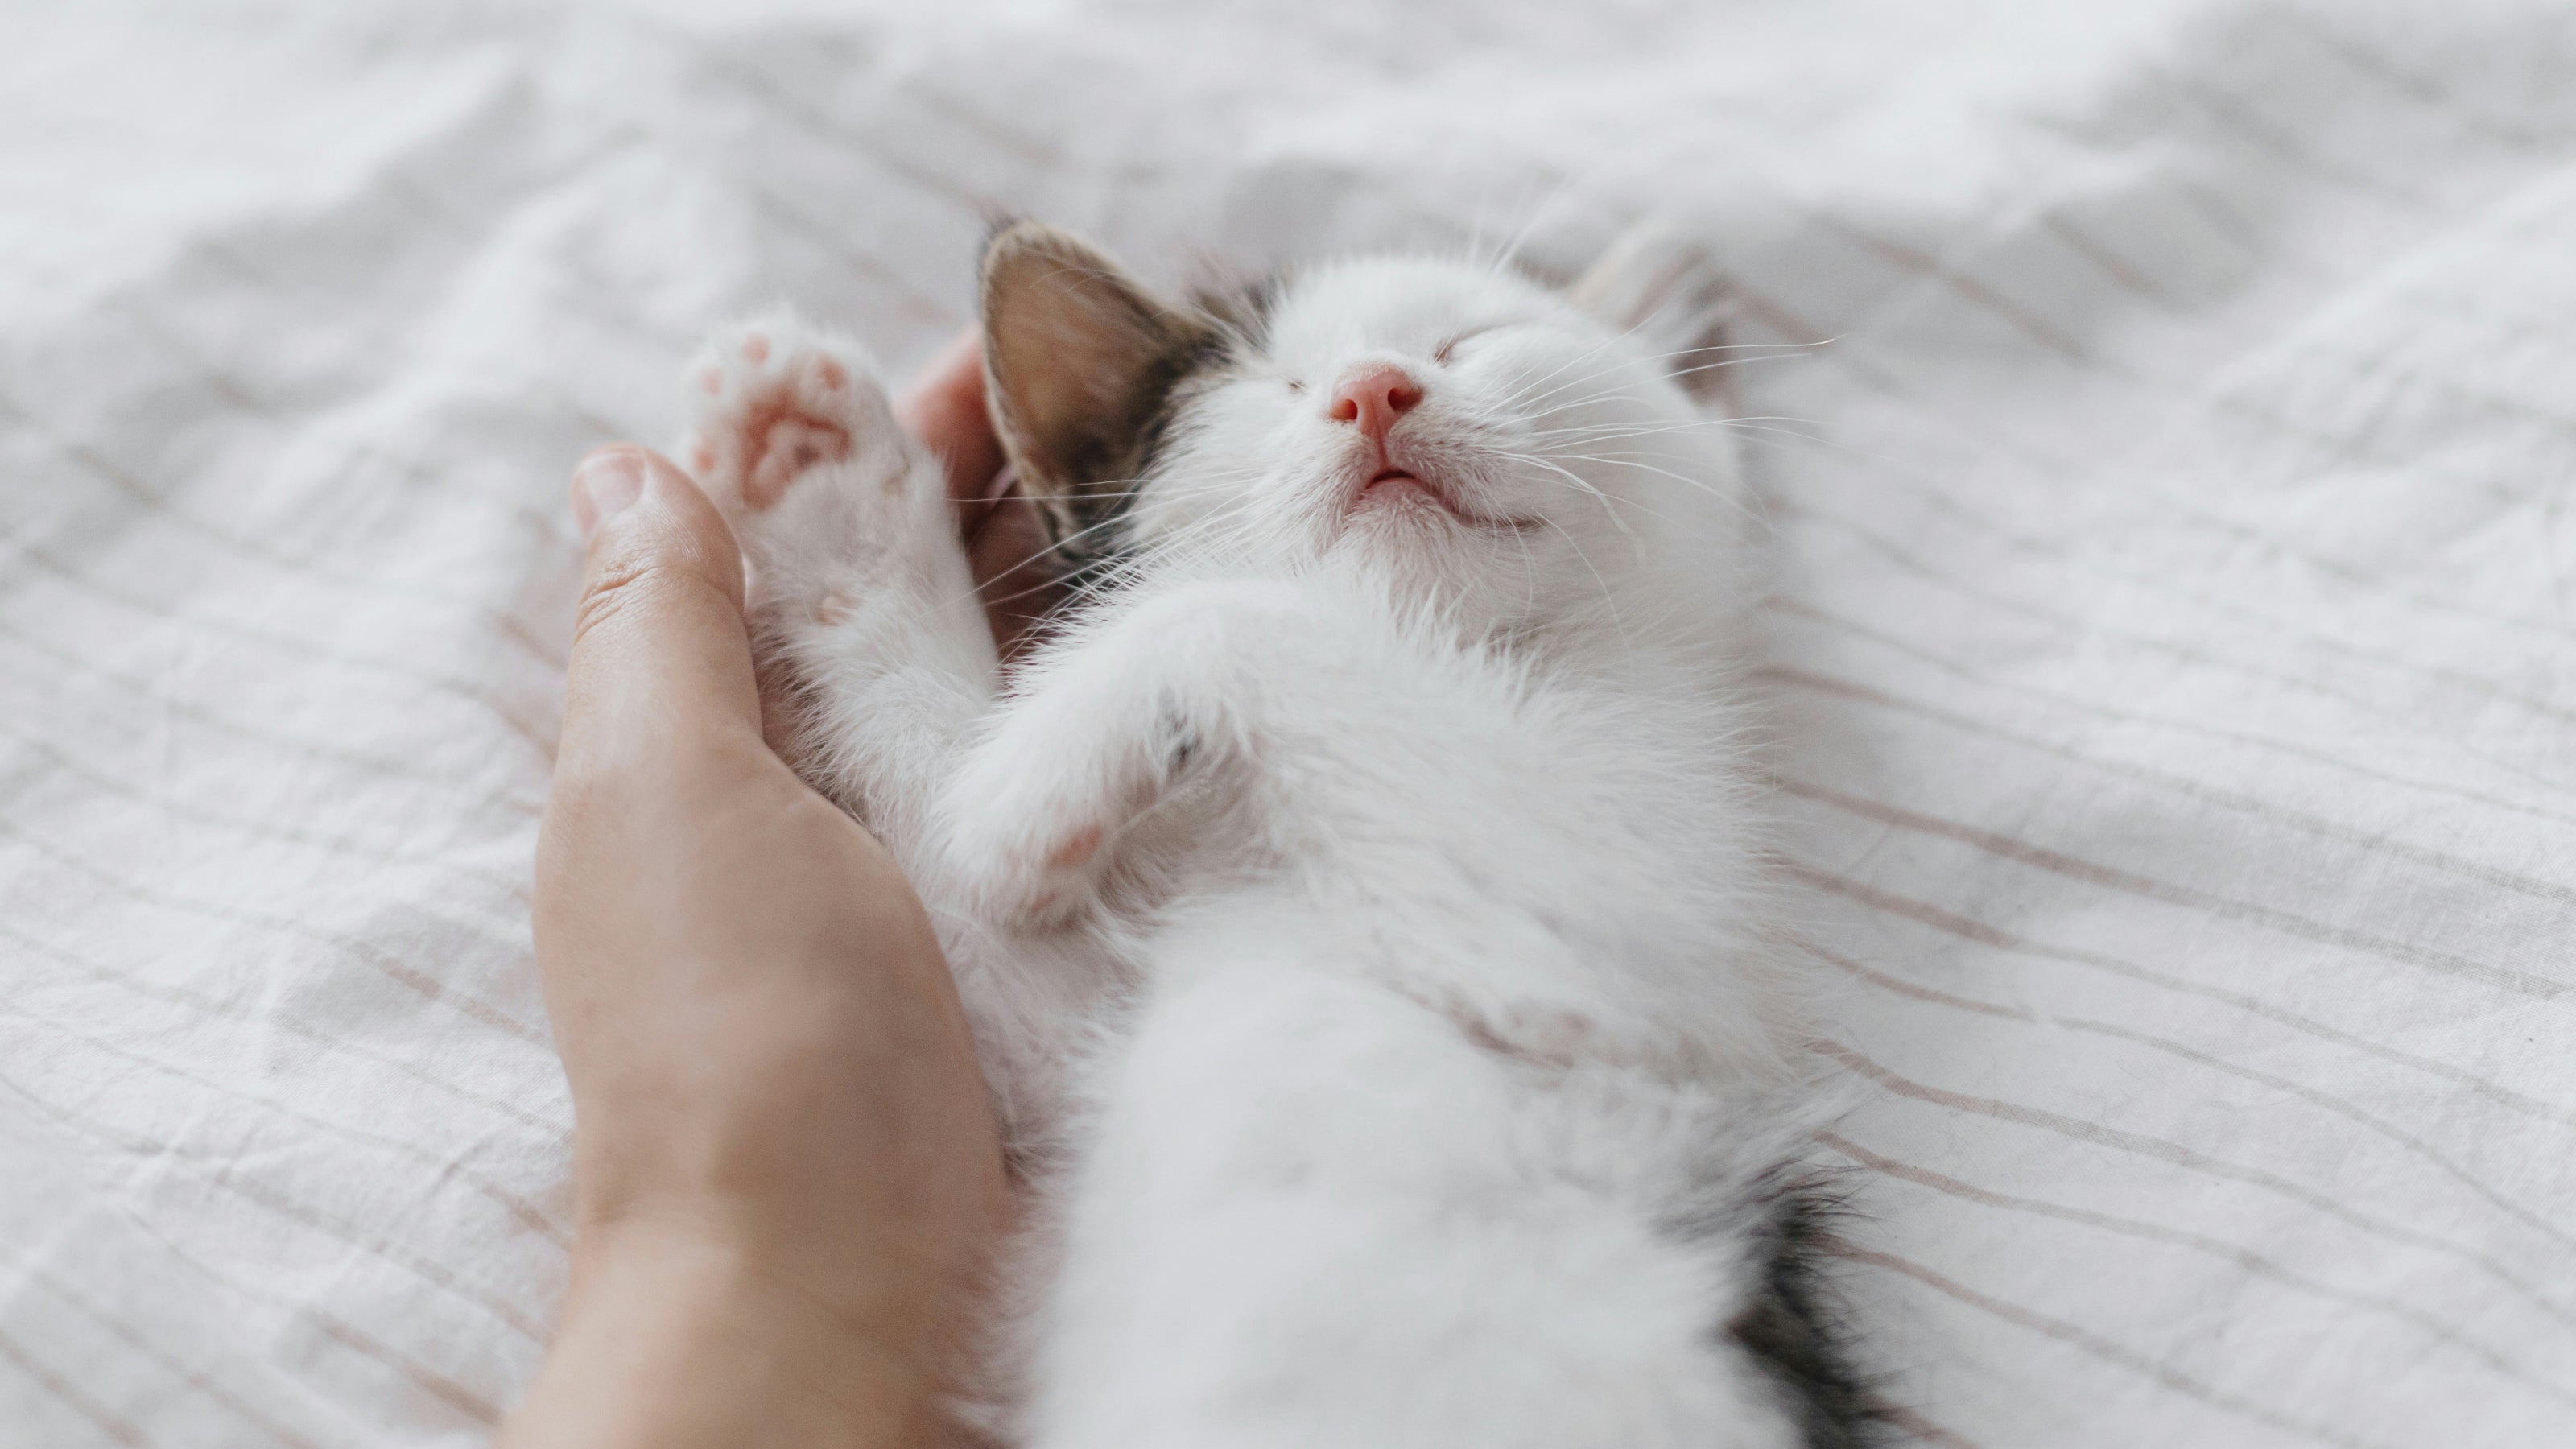 A white cat purring while the hand of a person pets it